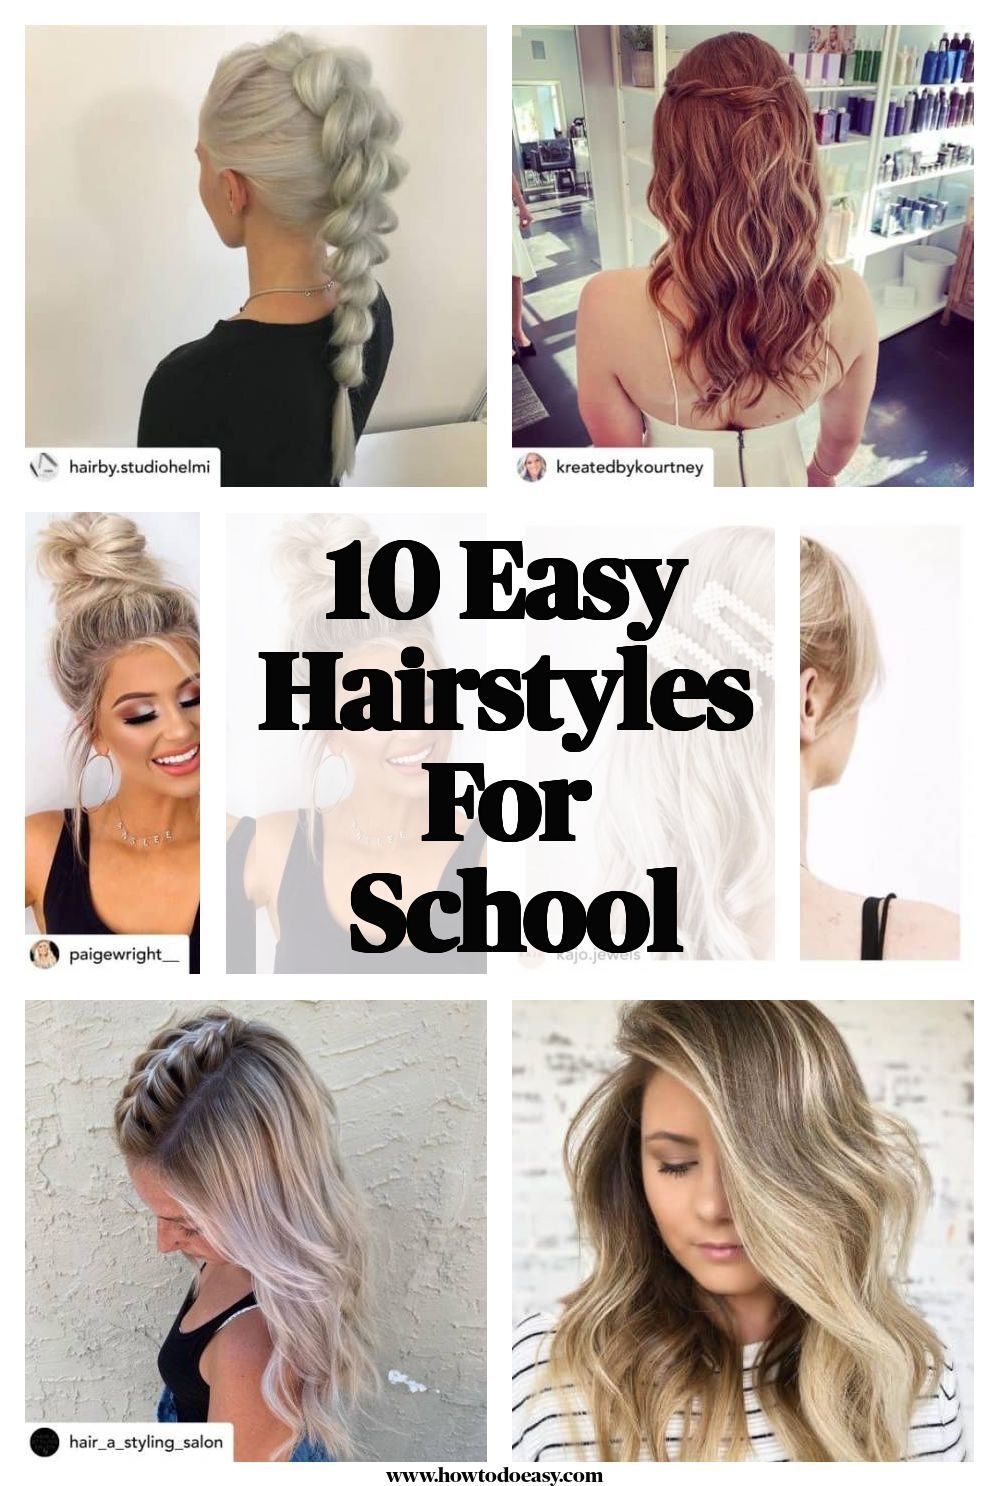 10 Easy Hairstyles For School -   Beauty & Style